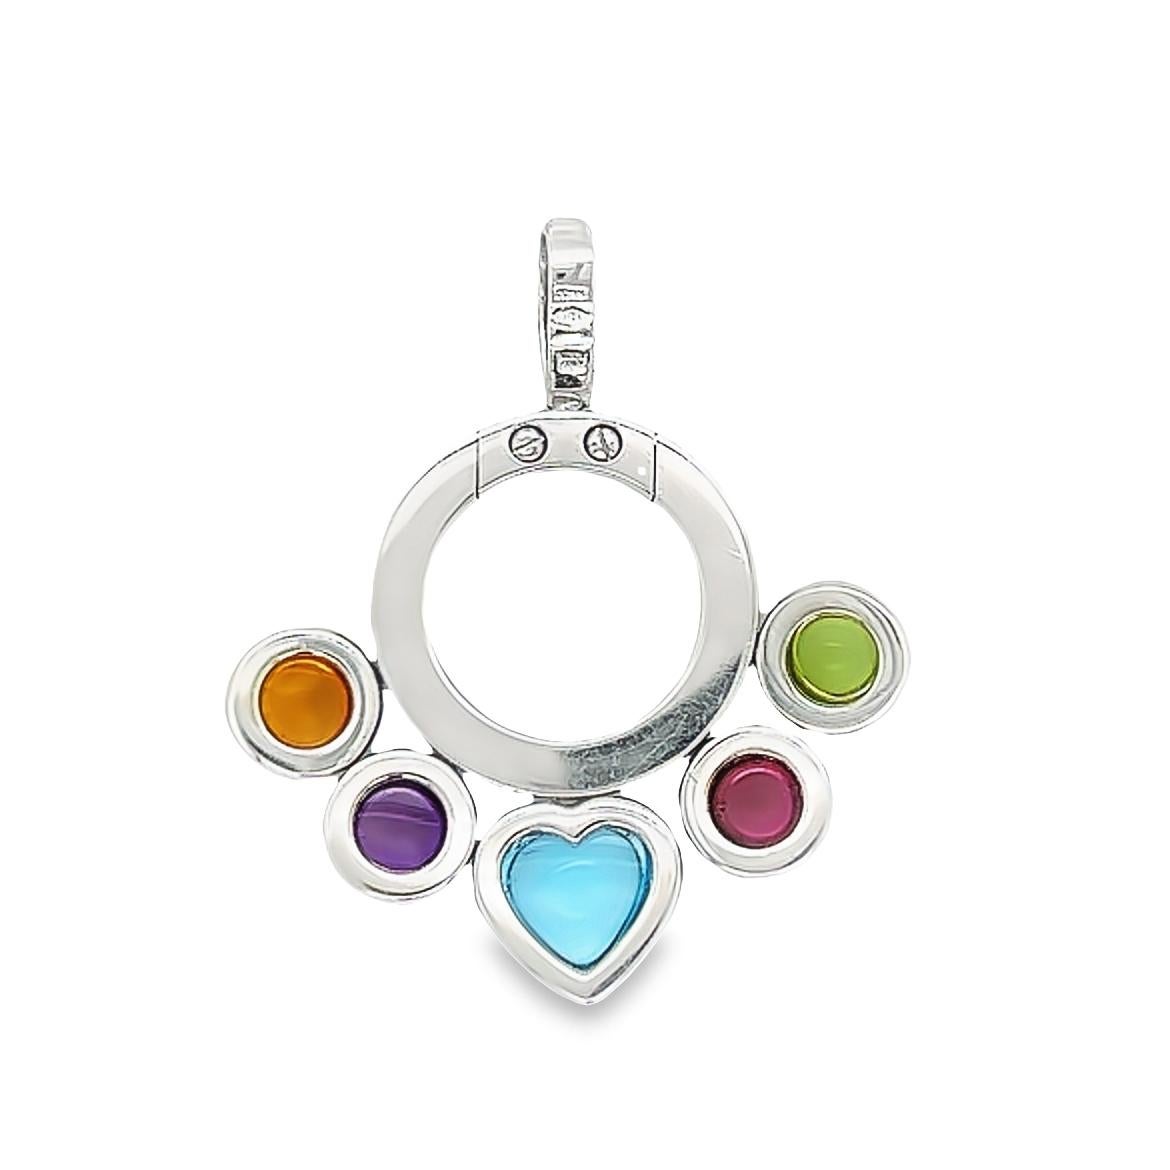 One beautiful pendant crafted by famed designer Bvlgari. The pendant is from the Allegra collection and pop's with vibrant colors. The pendant is crafted in 18k white gold and show's a high polished full circle engraved Bvlgari. The pendant has 5